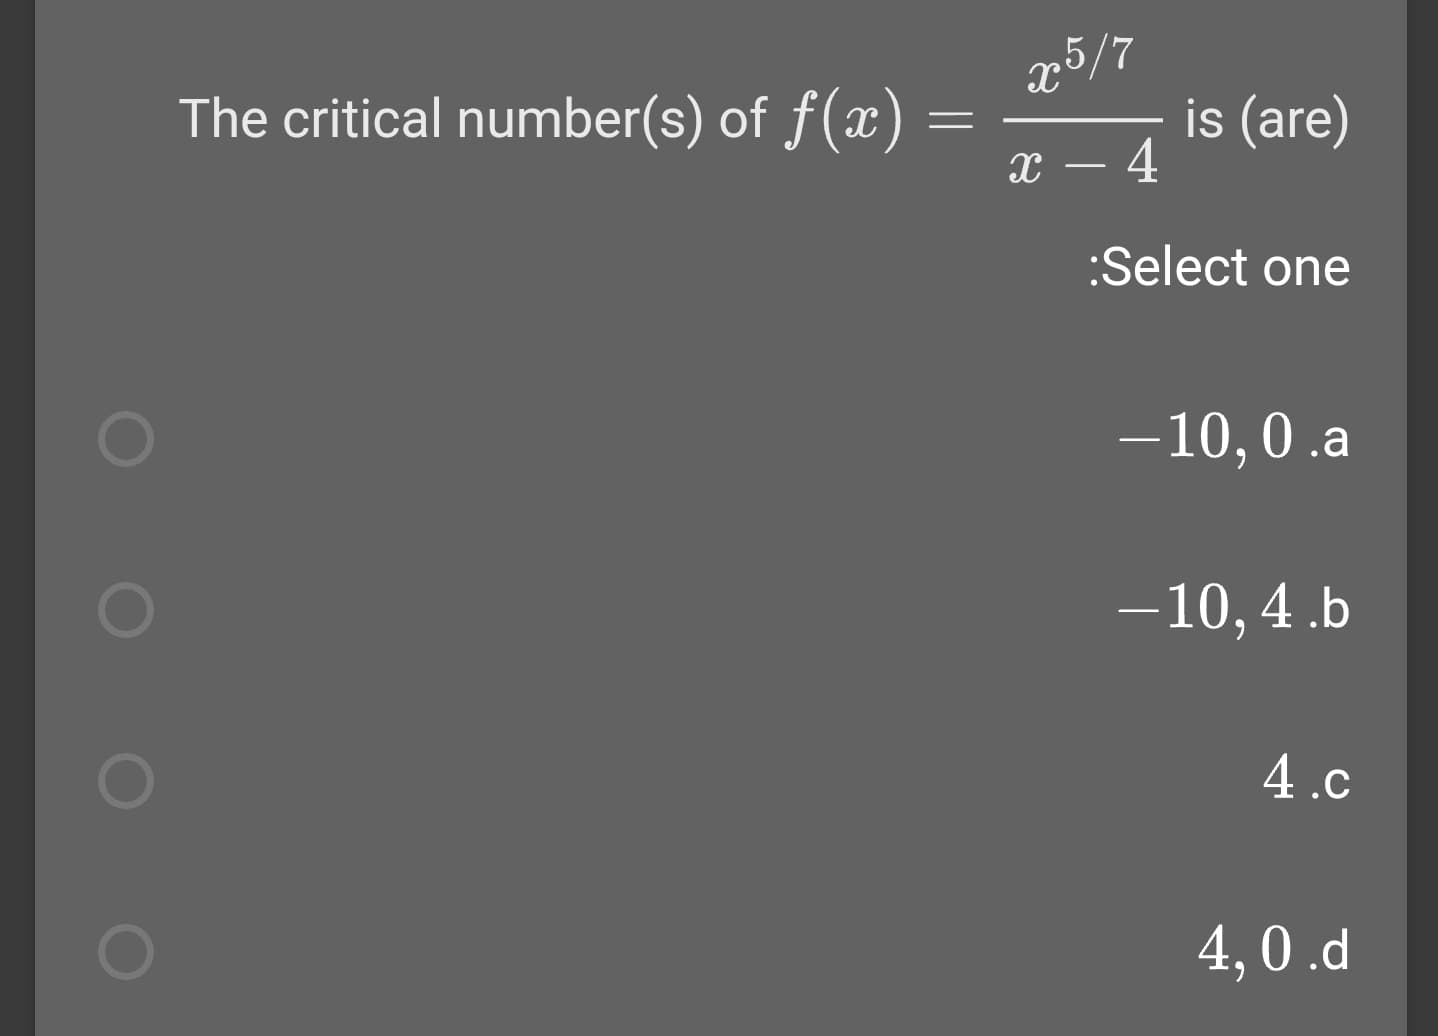 x5/7
is (are)
- 4
The critical number(s) of f(x)
:Select one
-10,0 .a
-10, 4 .b
4.c
4,0.d
